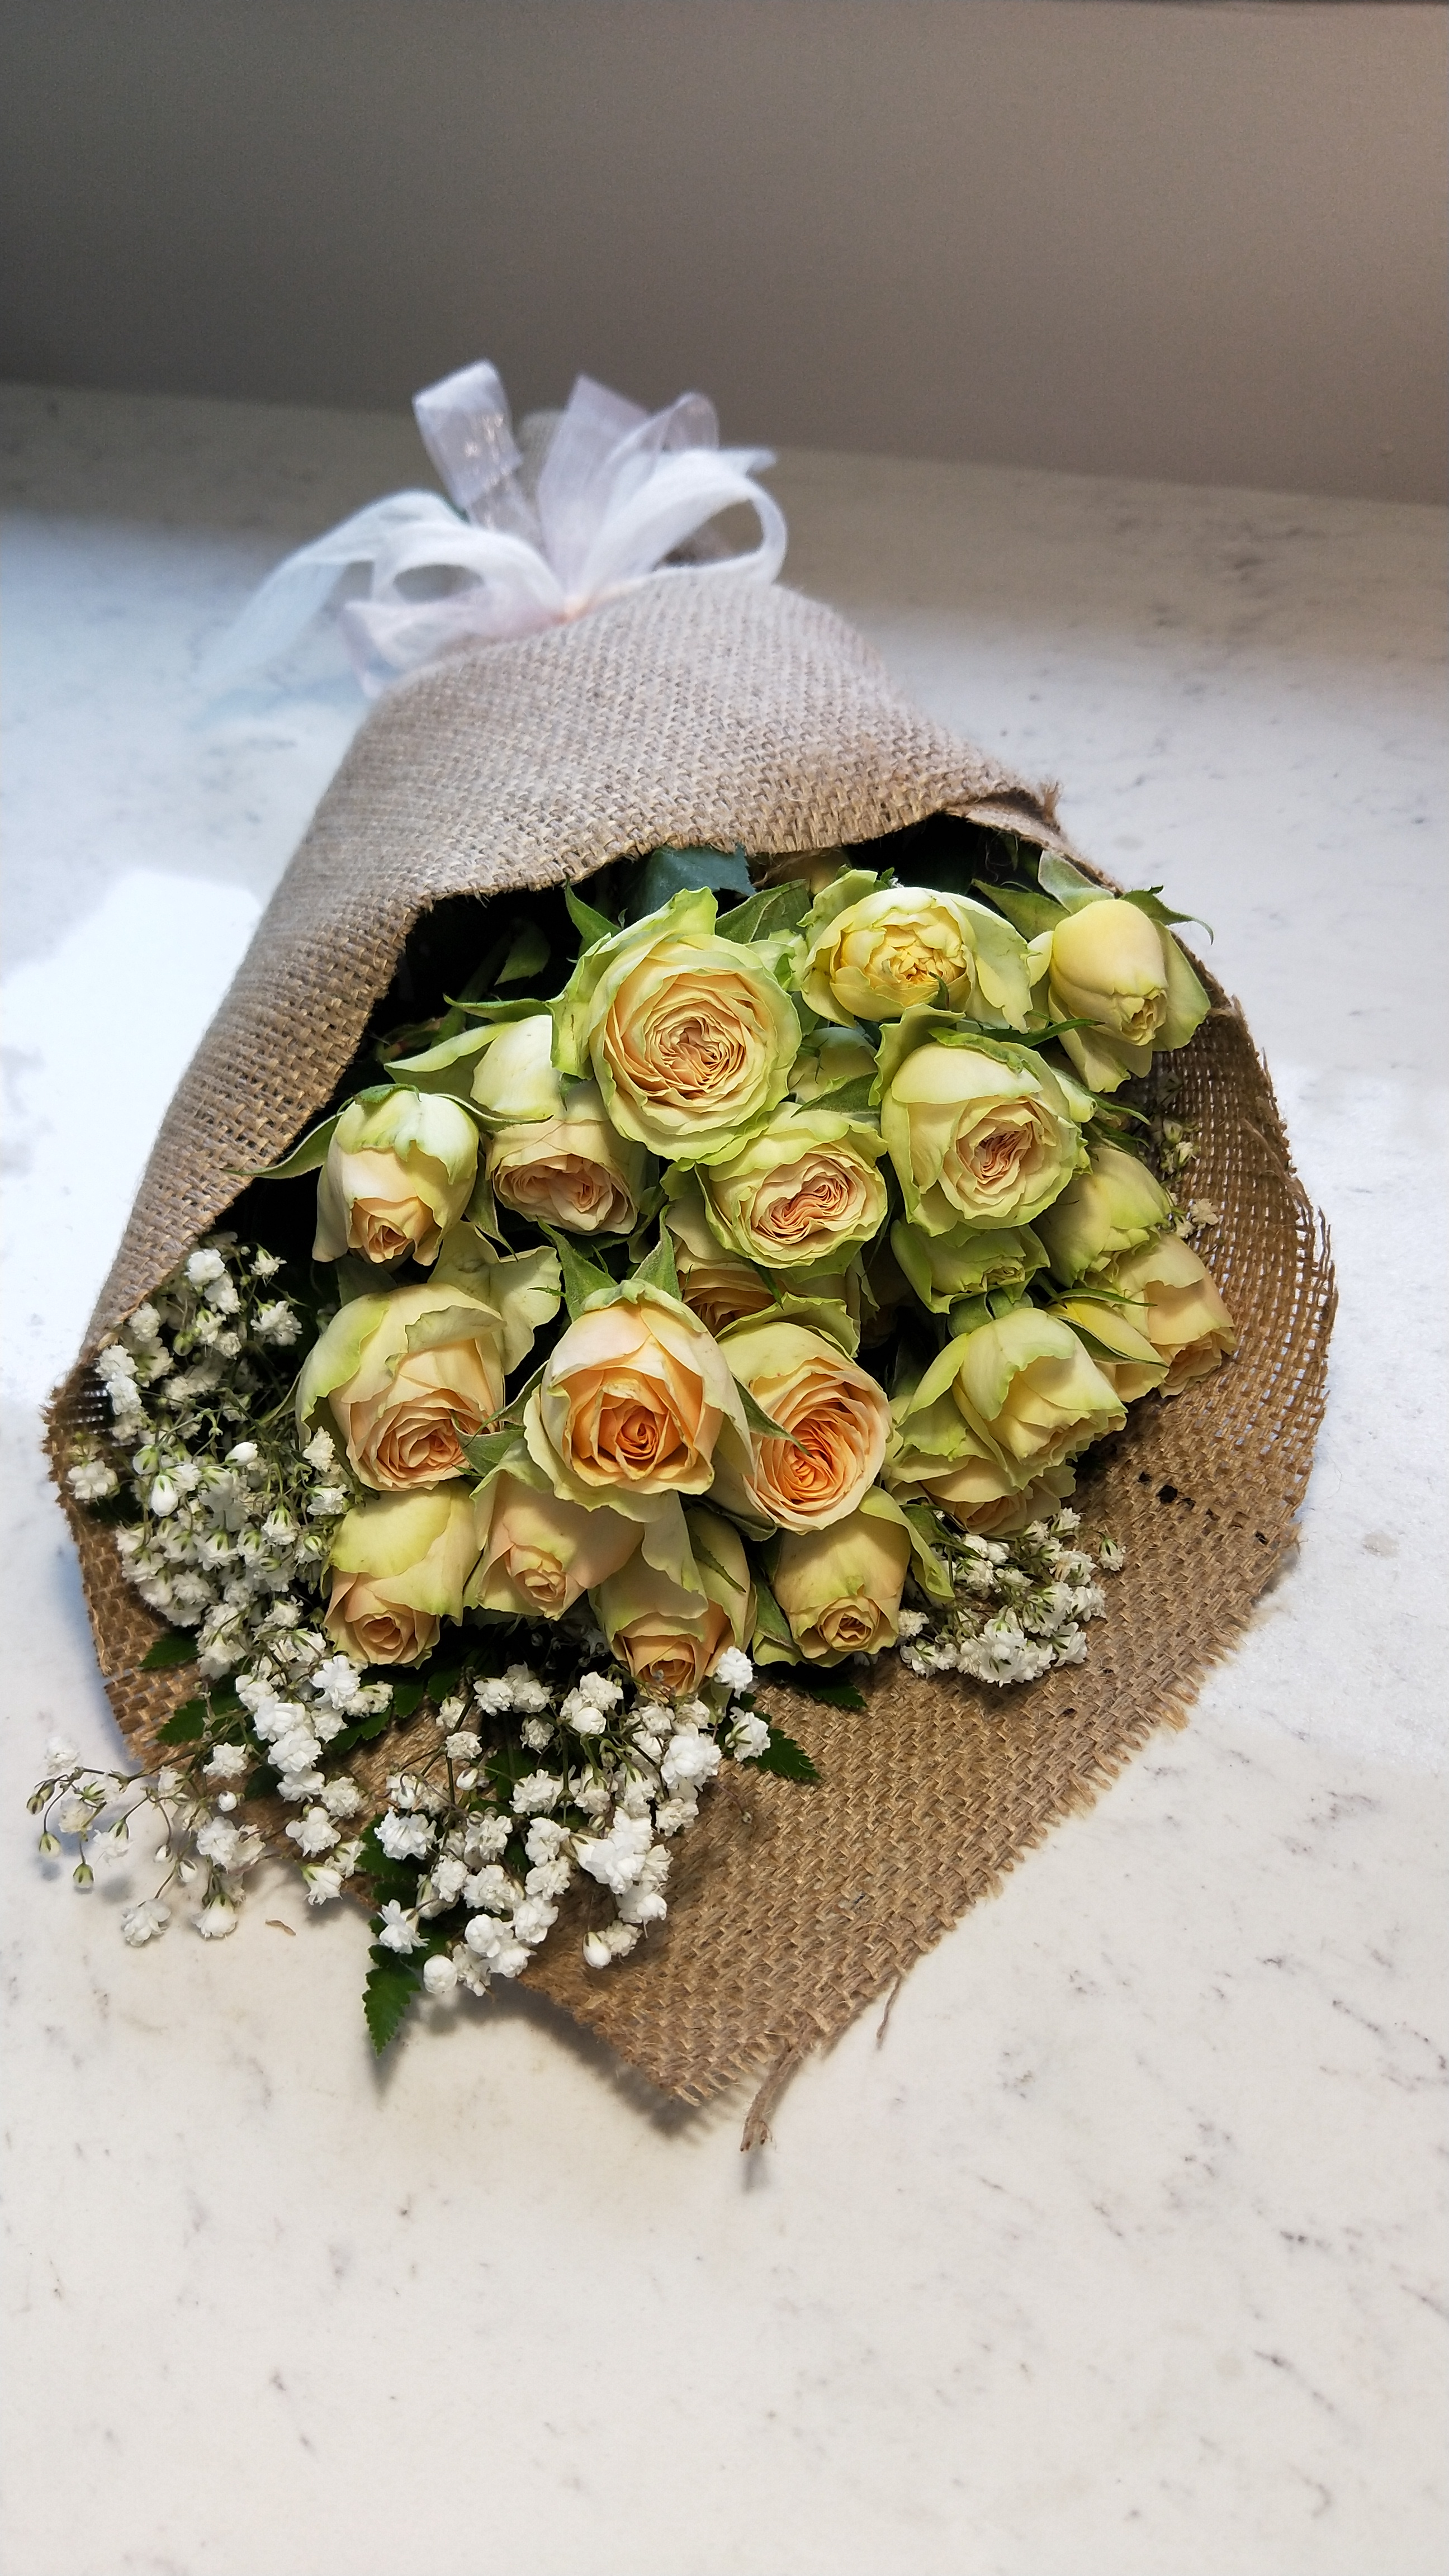 Cream spray roses bouquet makes ideal gift for many occasions.